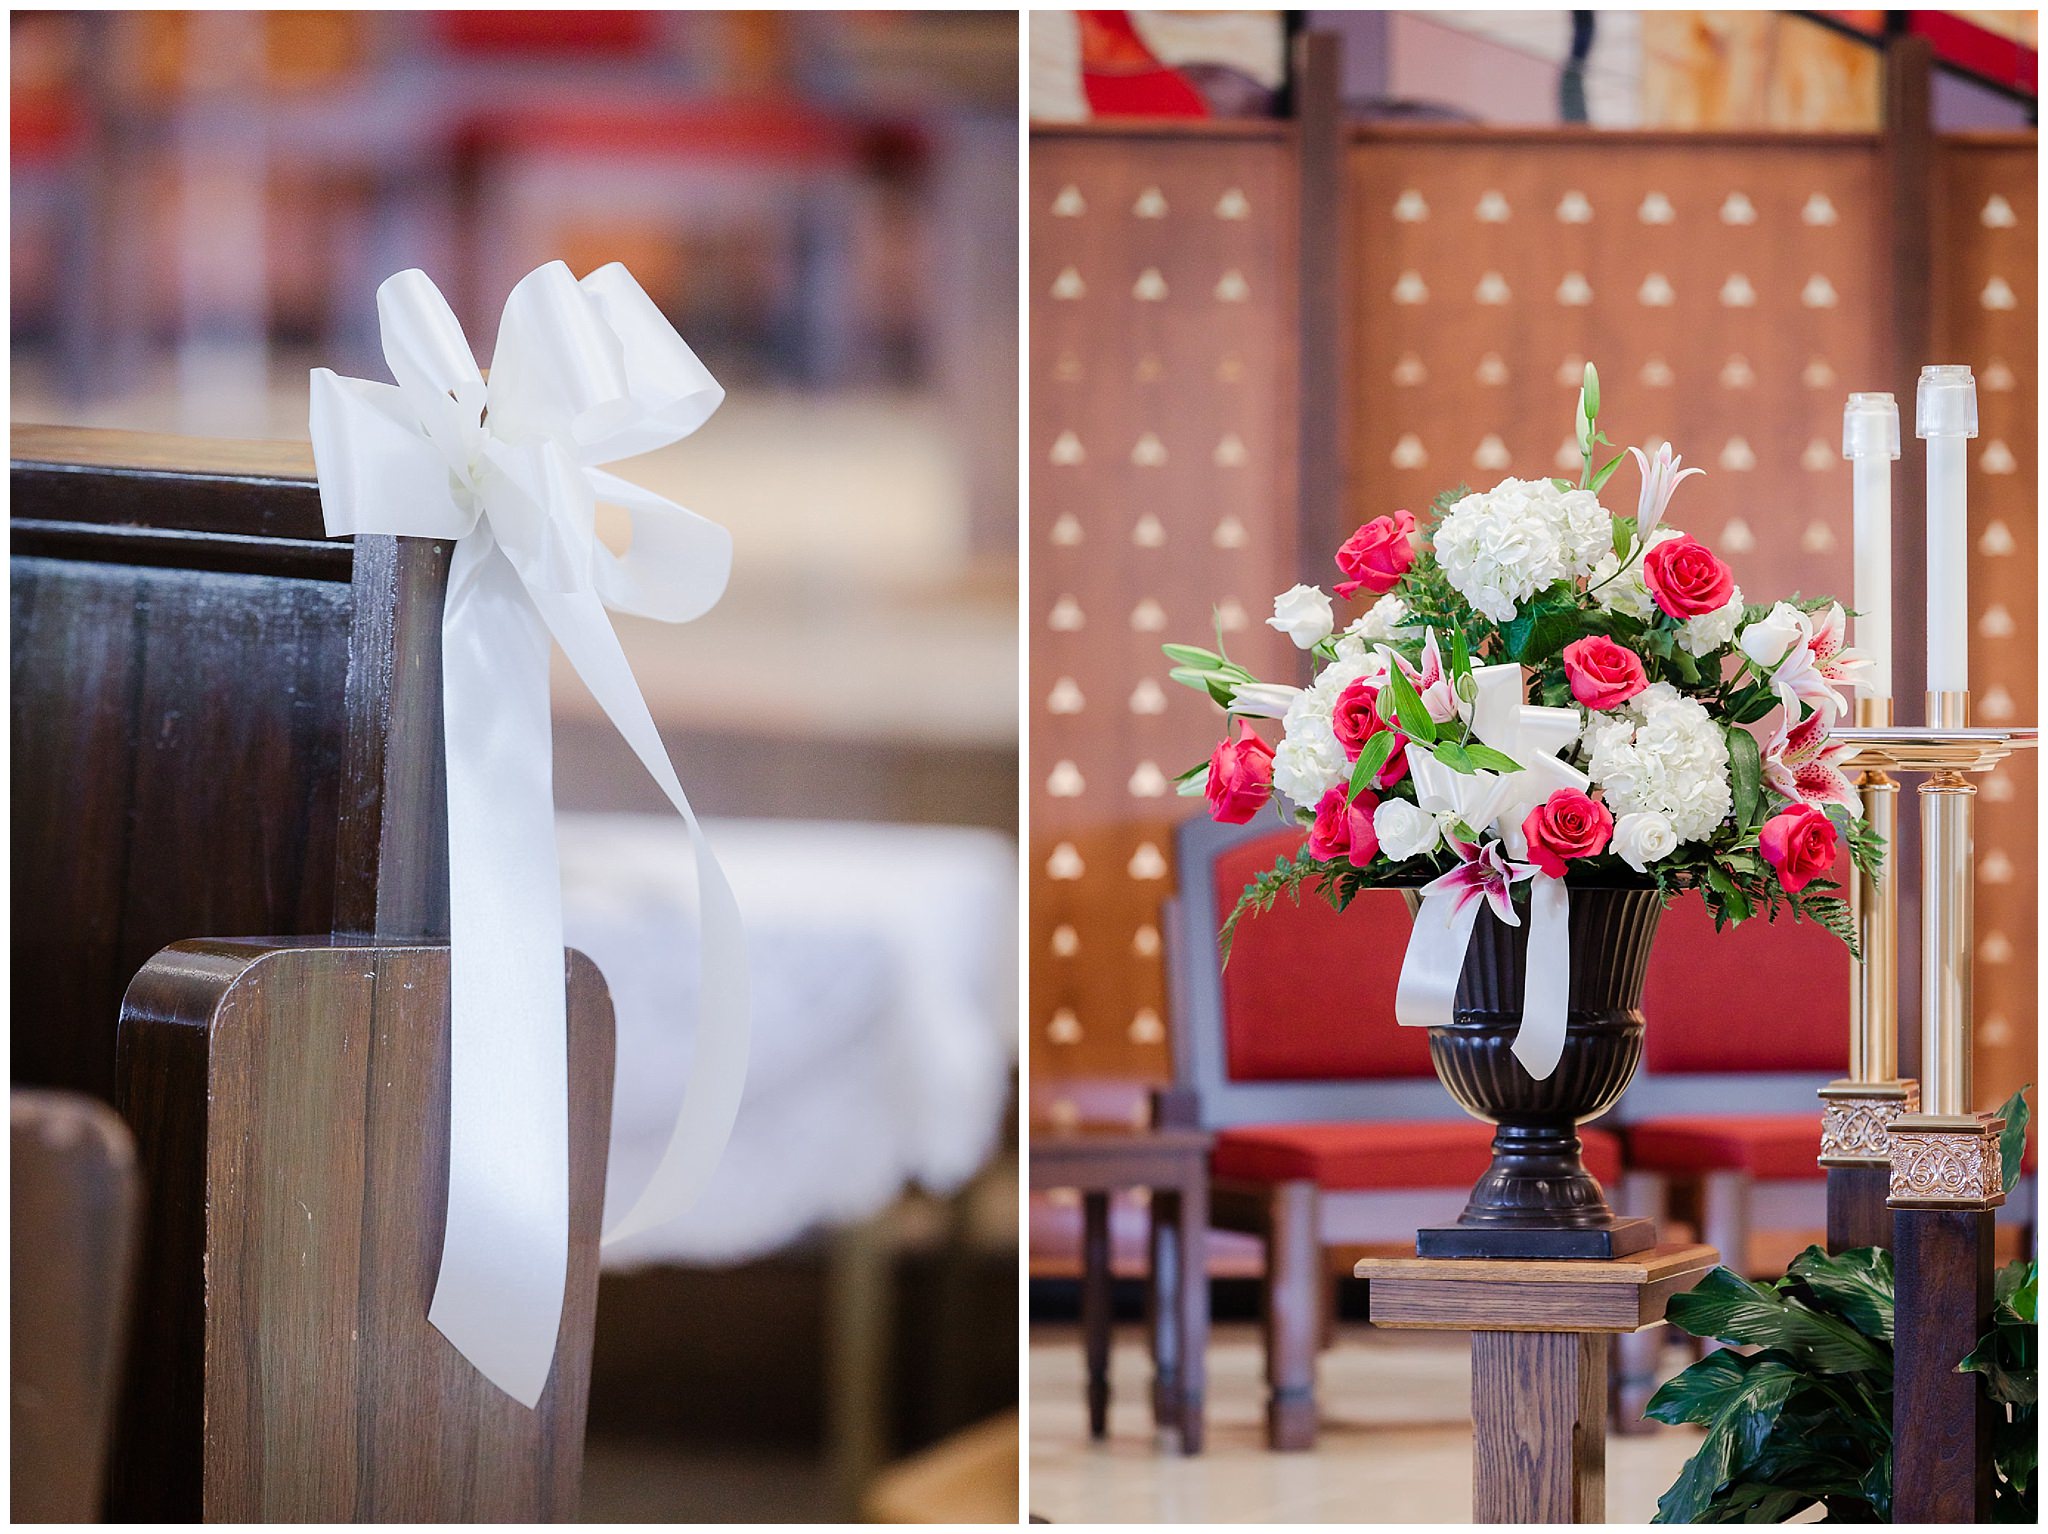 Pew bows and floral arrangements for a Holy Trinity Catholic Church wedding